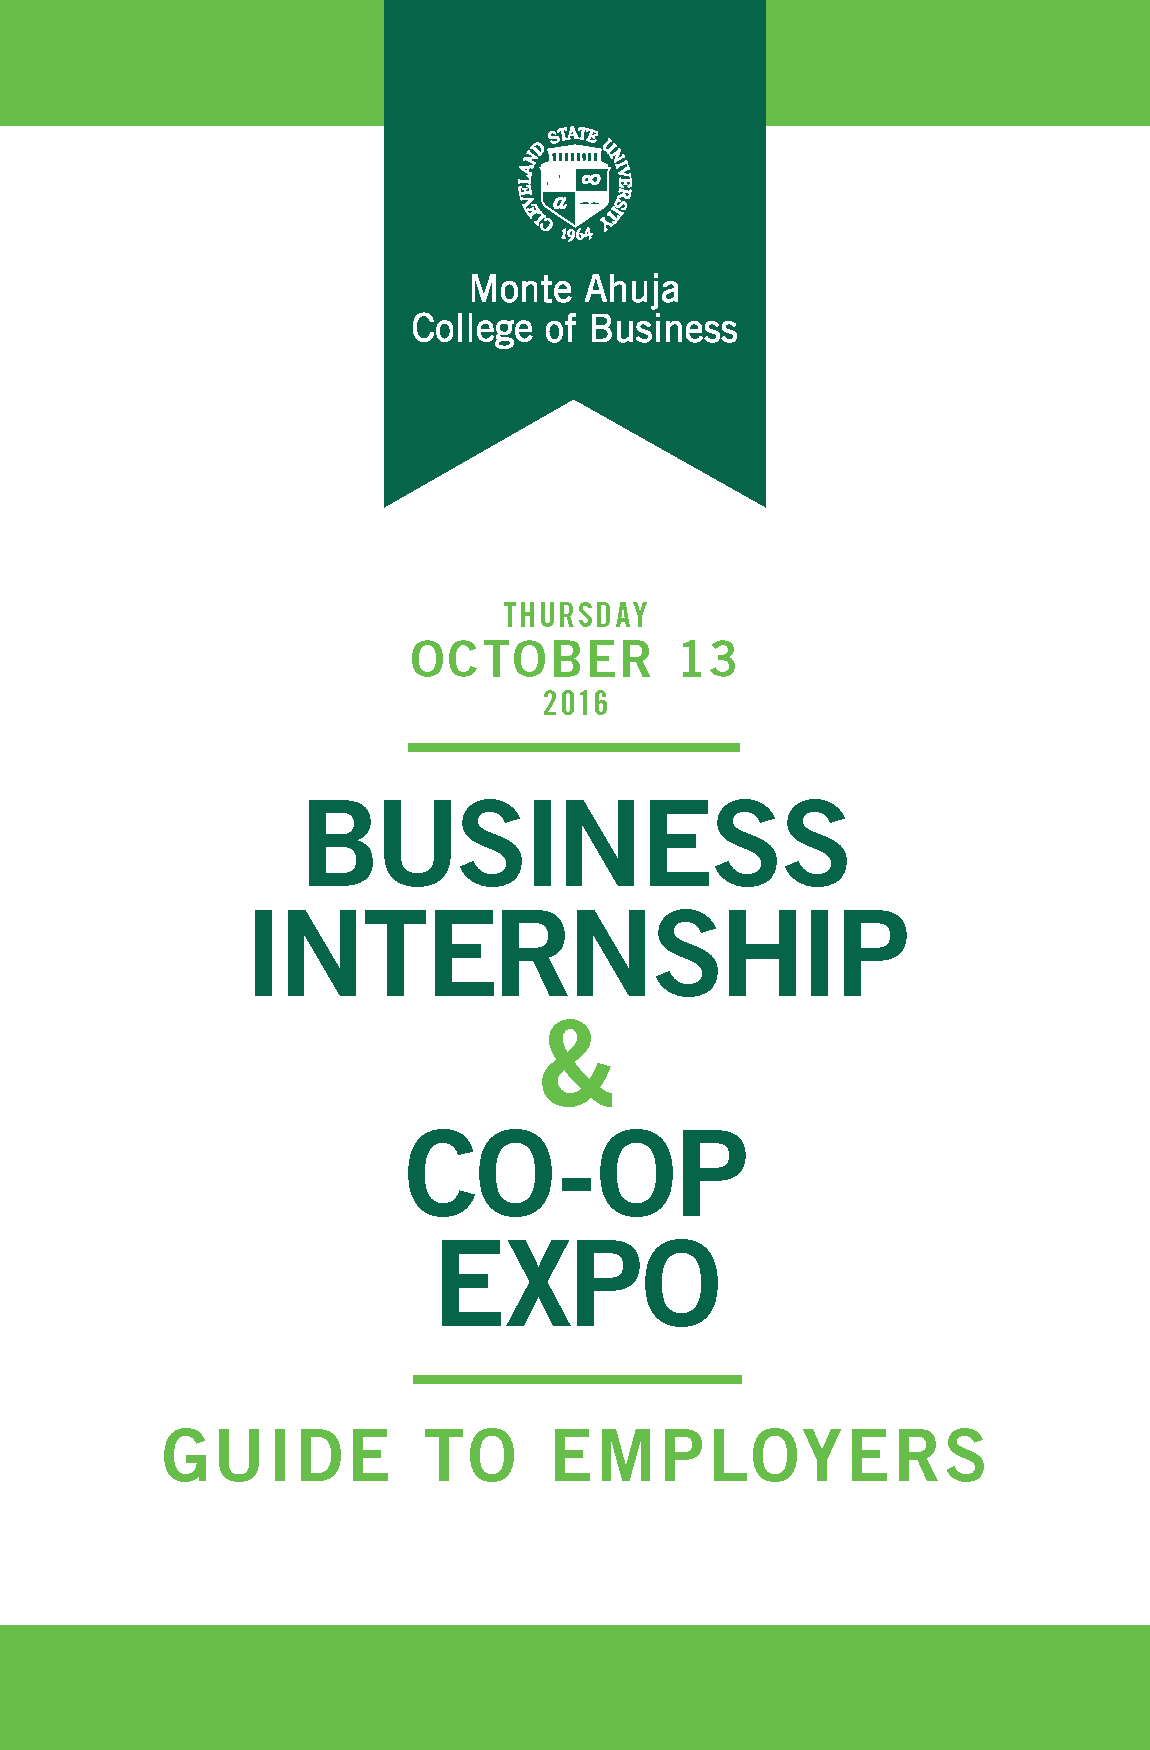 2016 Business Internship & Co-op Expo Guide to Employers